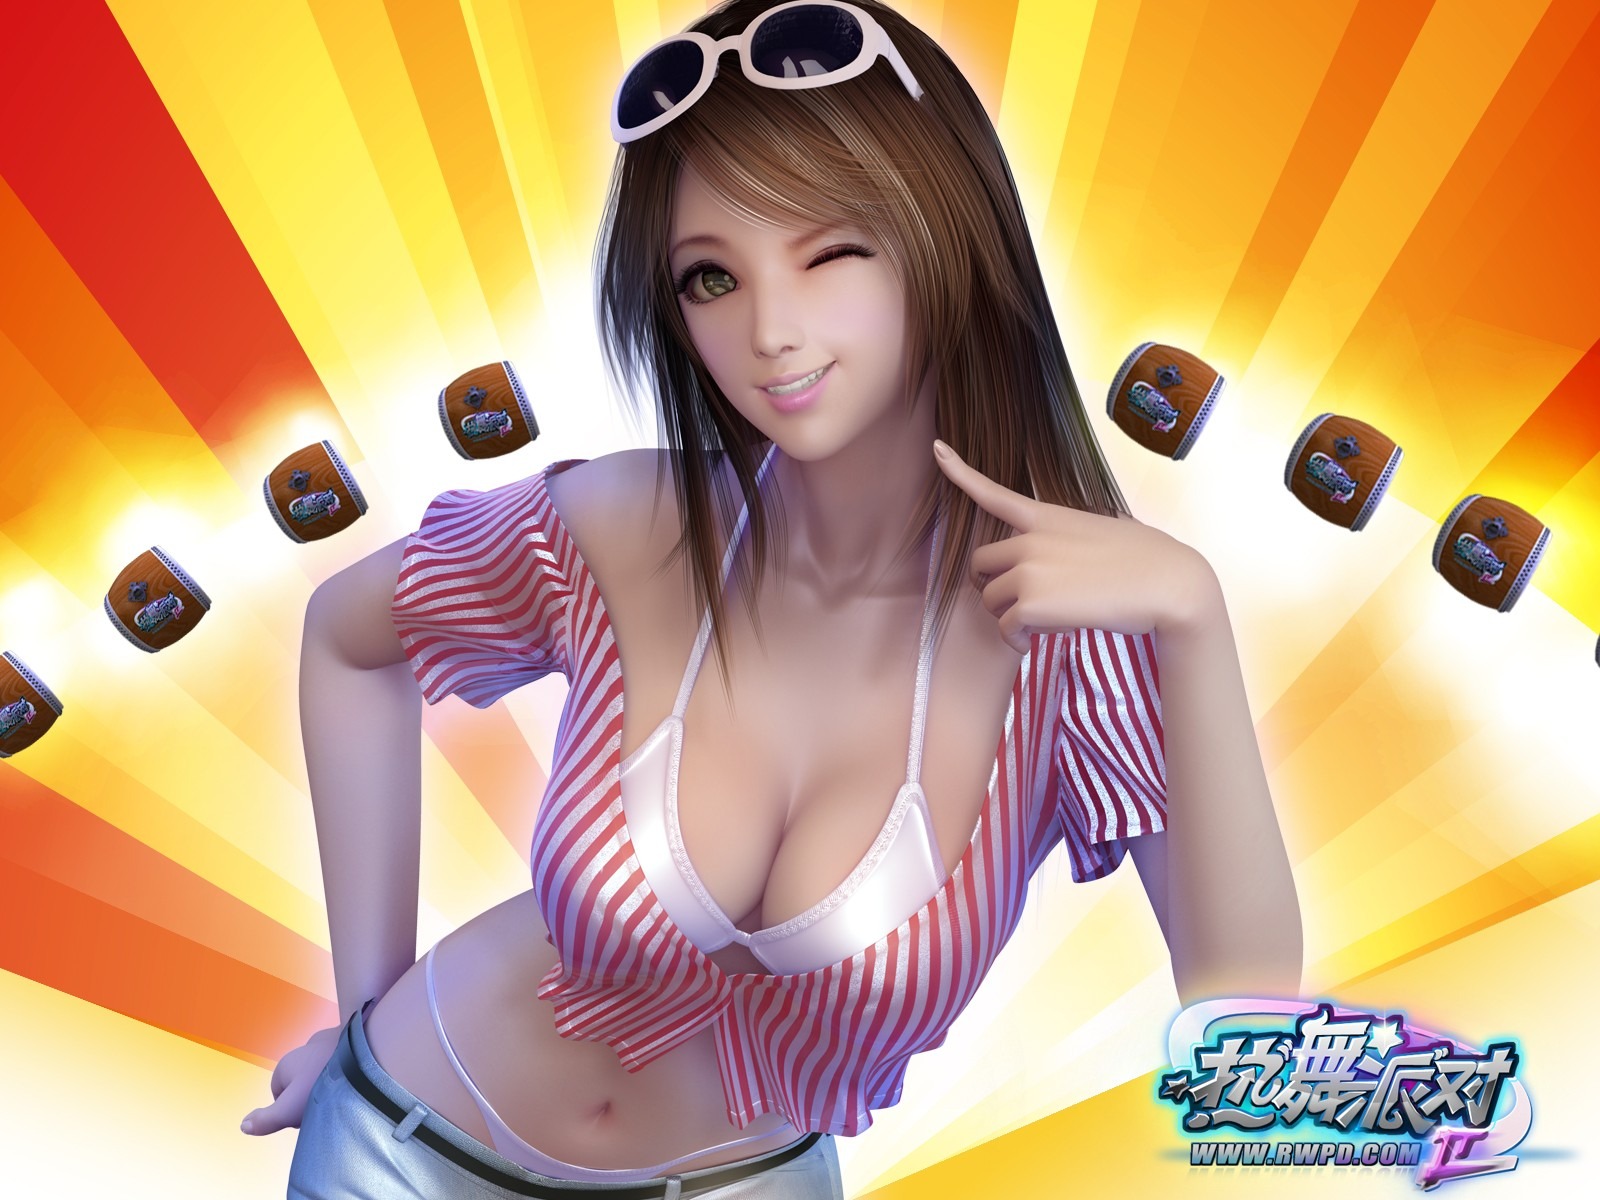 Online game Hot Dance Party II official wallpapers #19 - 1600x1200